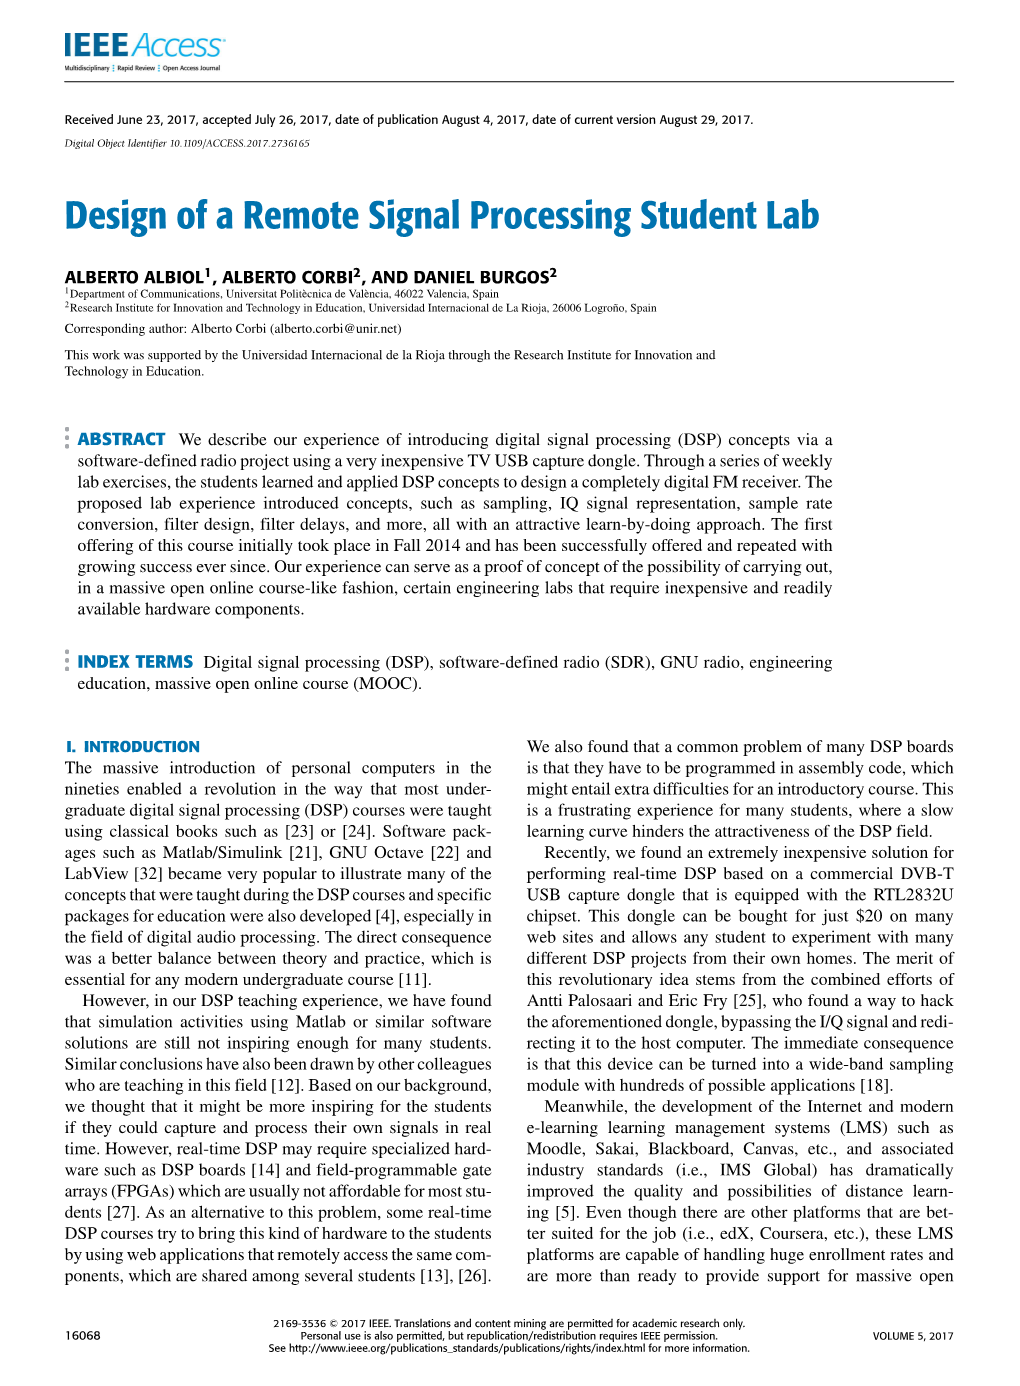 Design of a Remote Signal Processing Student Lab